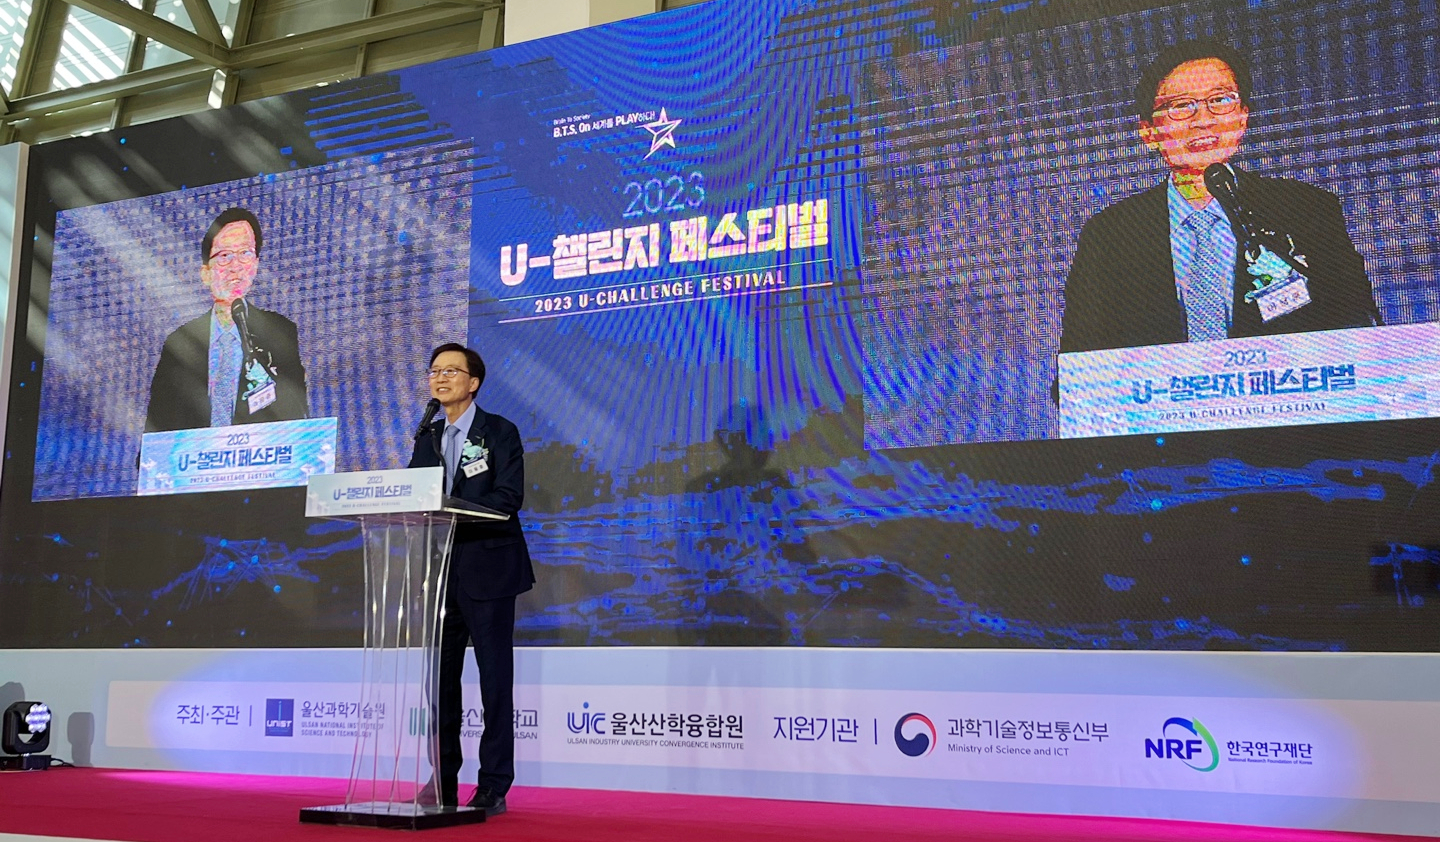 President Yong Hoon Lee at the opening ceremony of 2023 U-Challenge Festival, talking about the importance of creating an environment where students can identify problems, acquire practical knowledge, and challenge themselves.